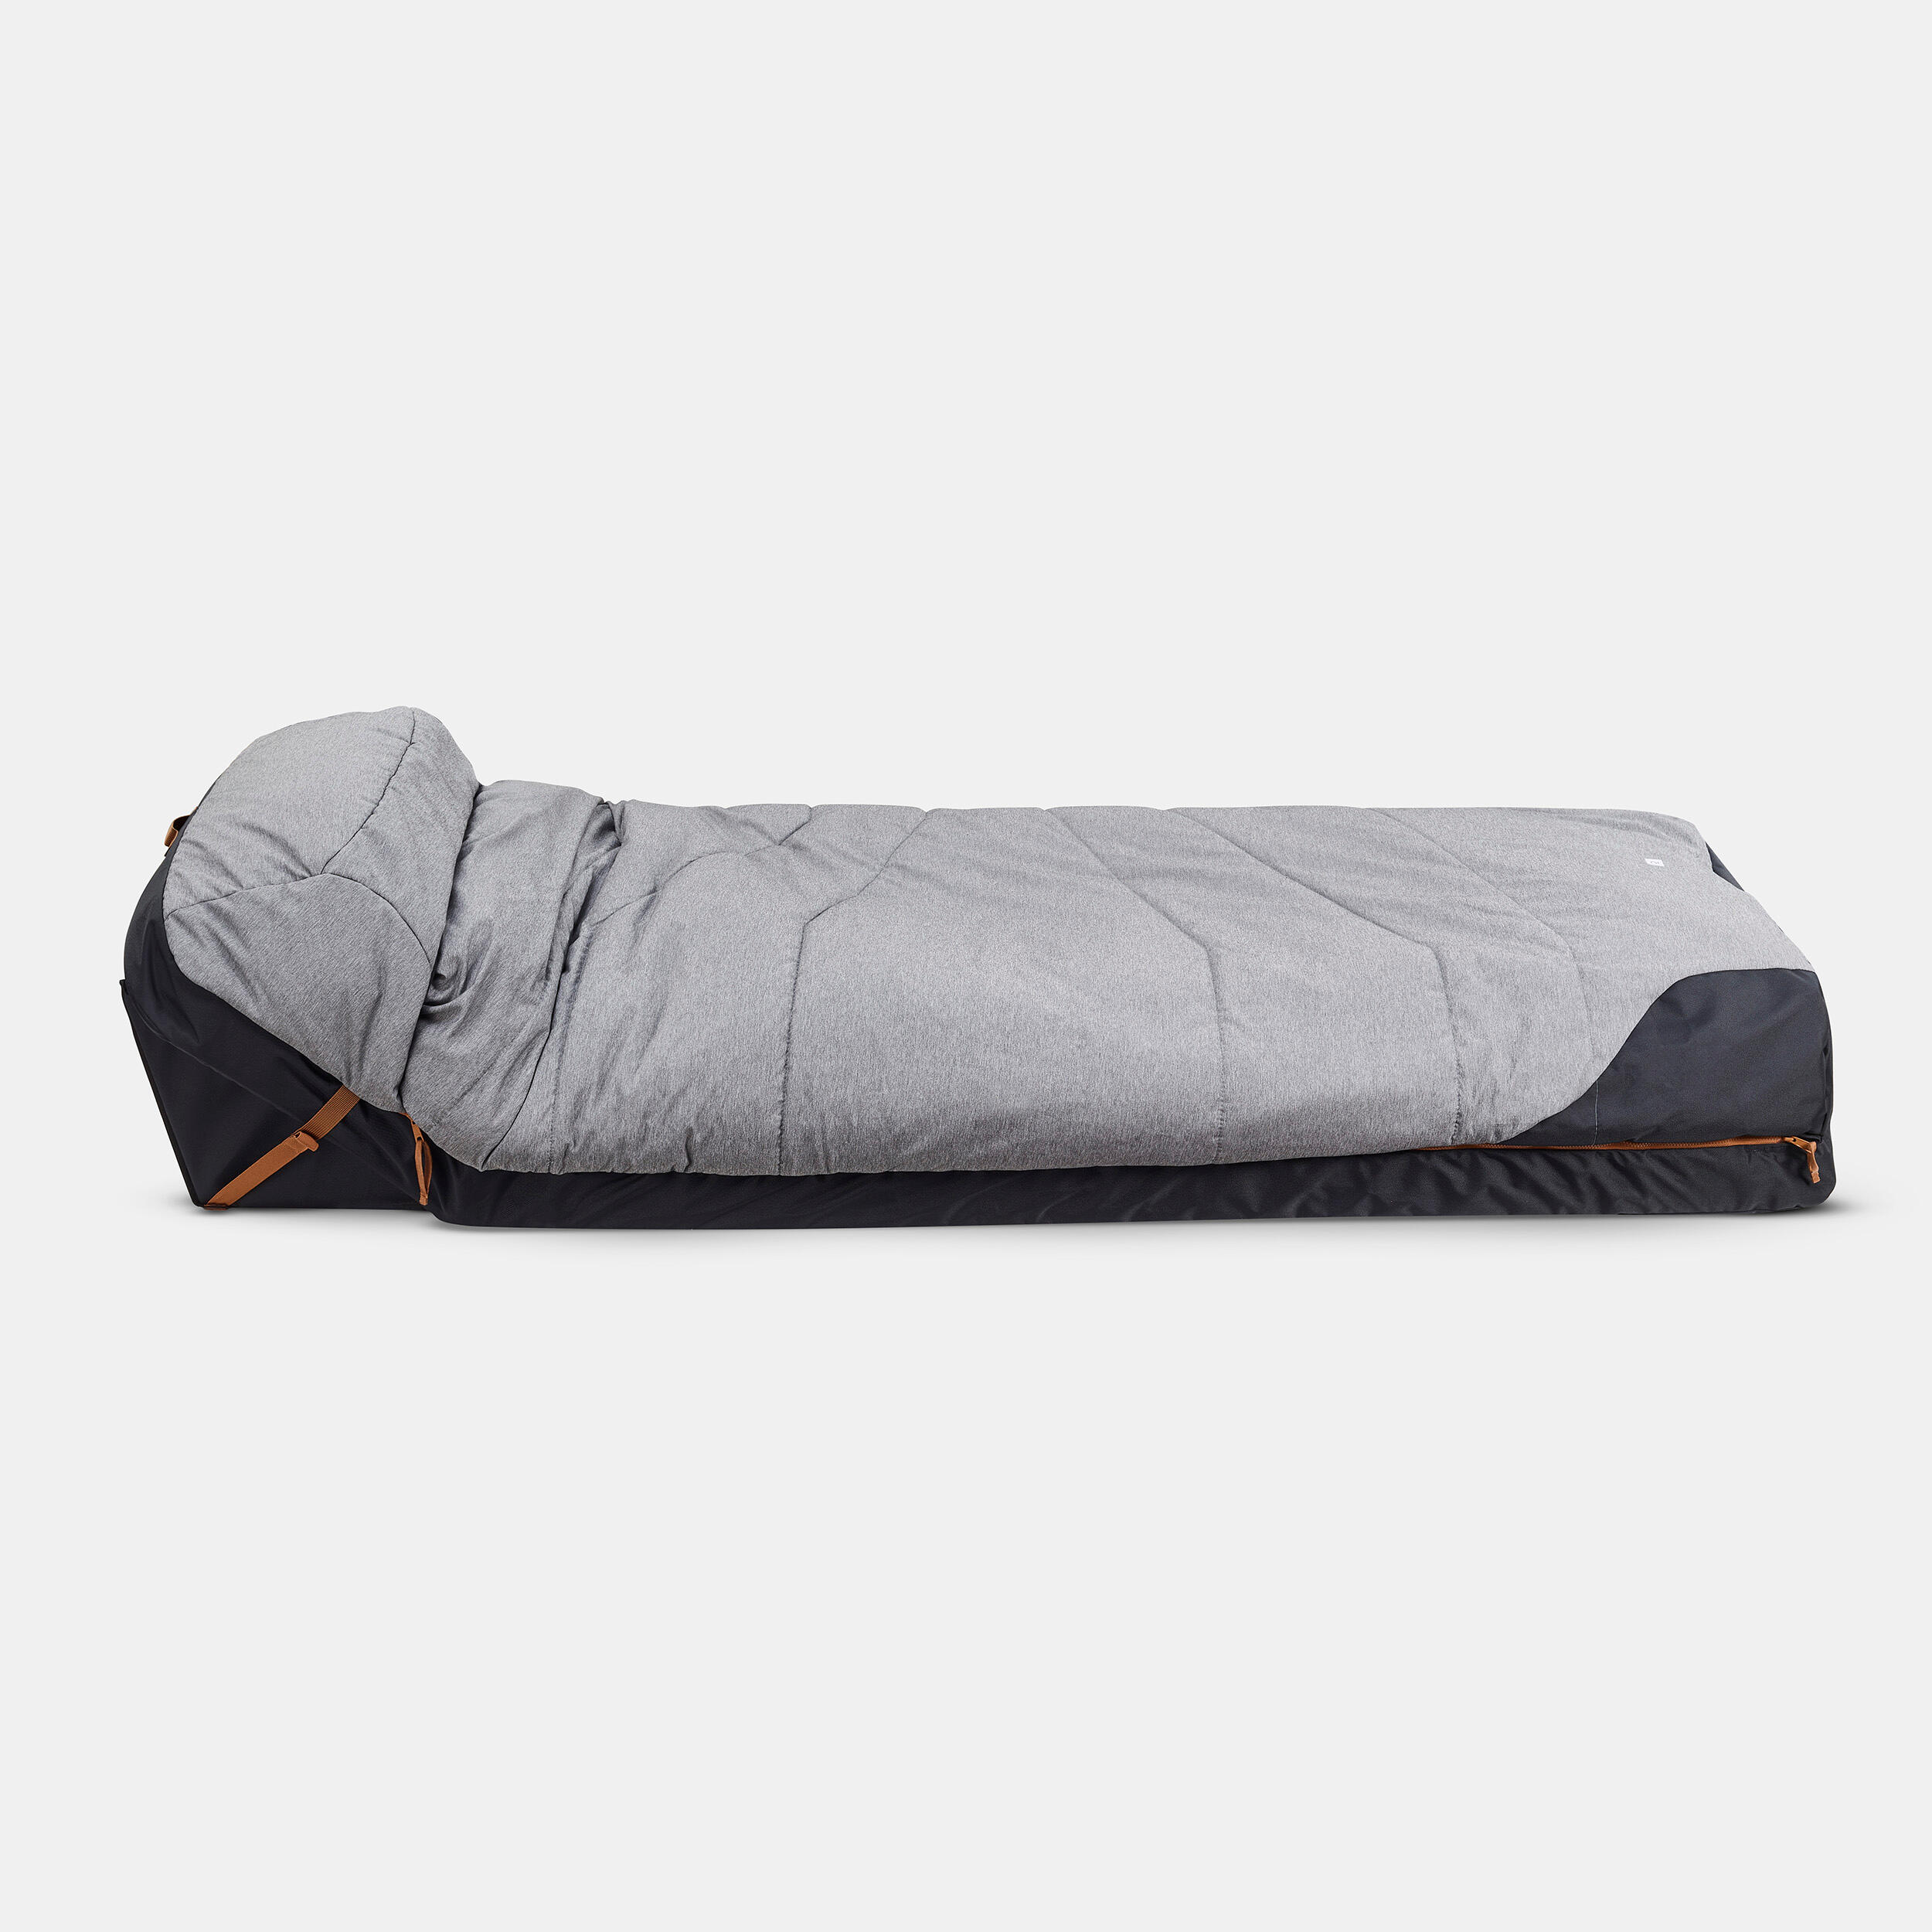 2-IN-1 COTTON SLEEPING BAG FOR CAMPING - PERFECT SLEEP 5°C COTTON 7/11